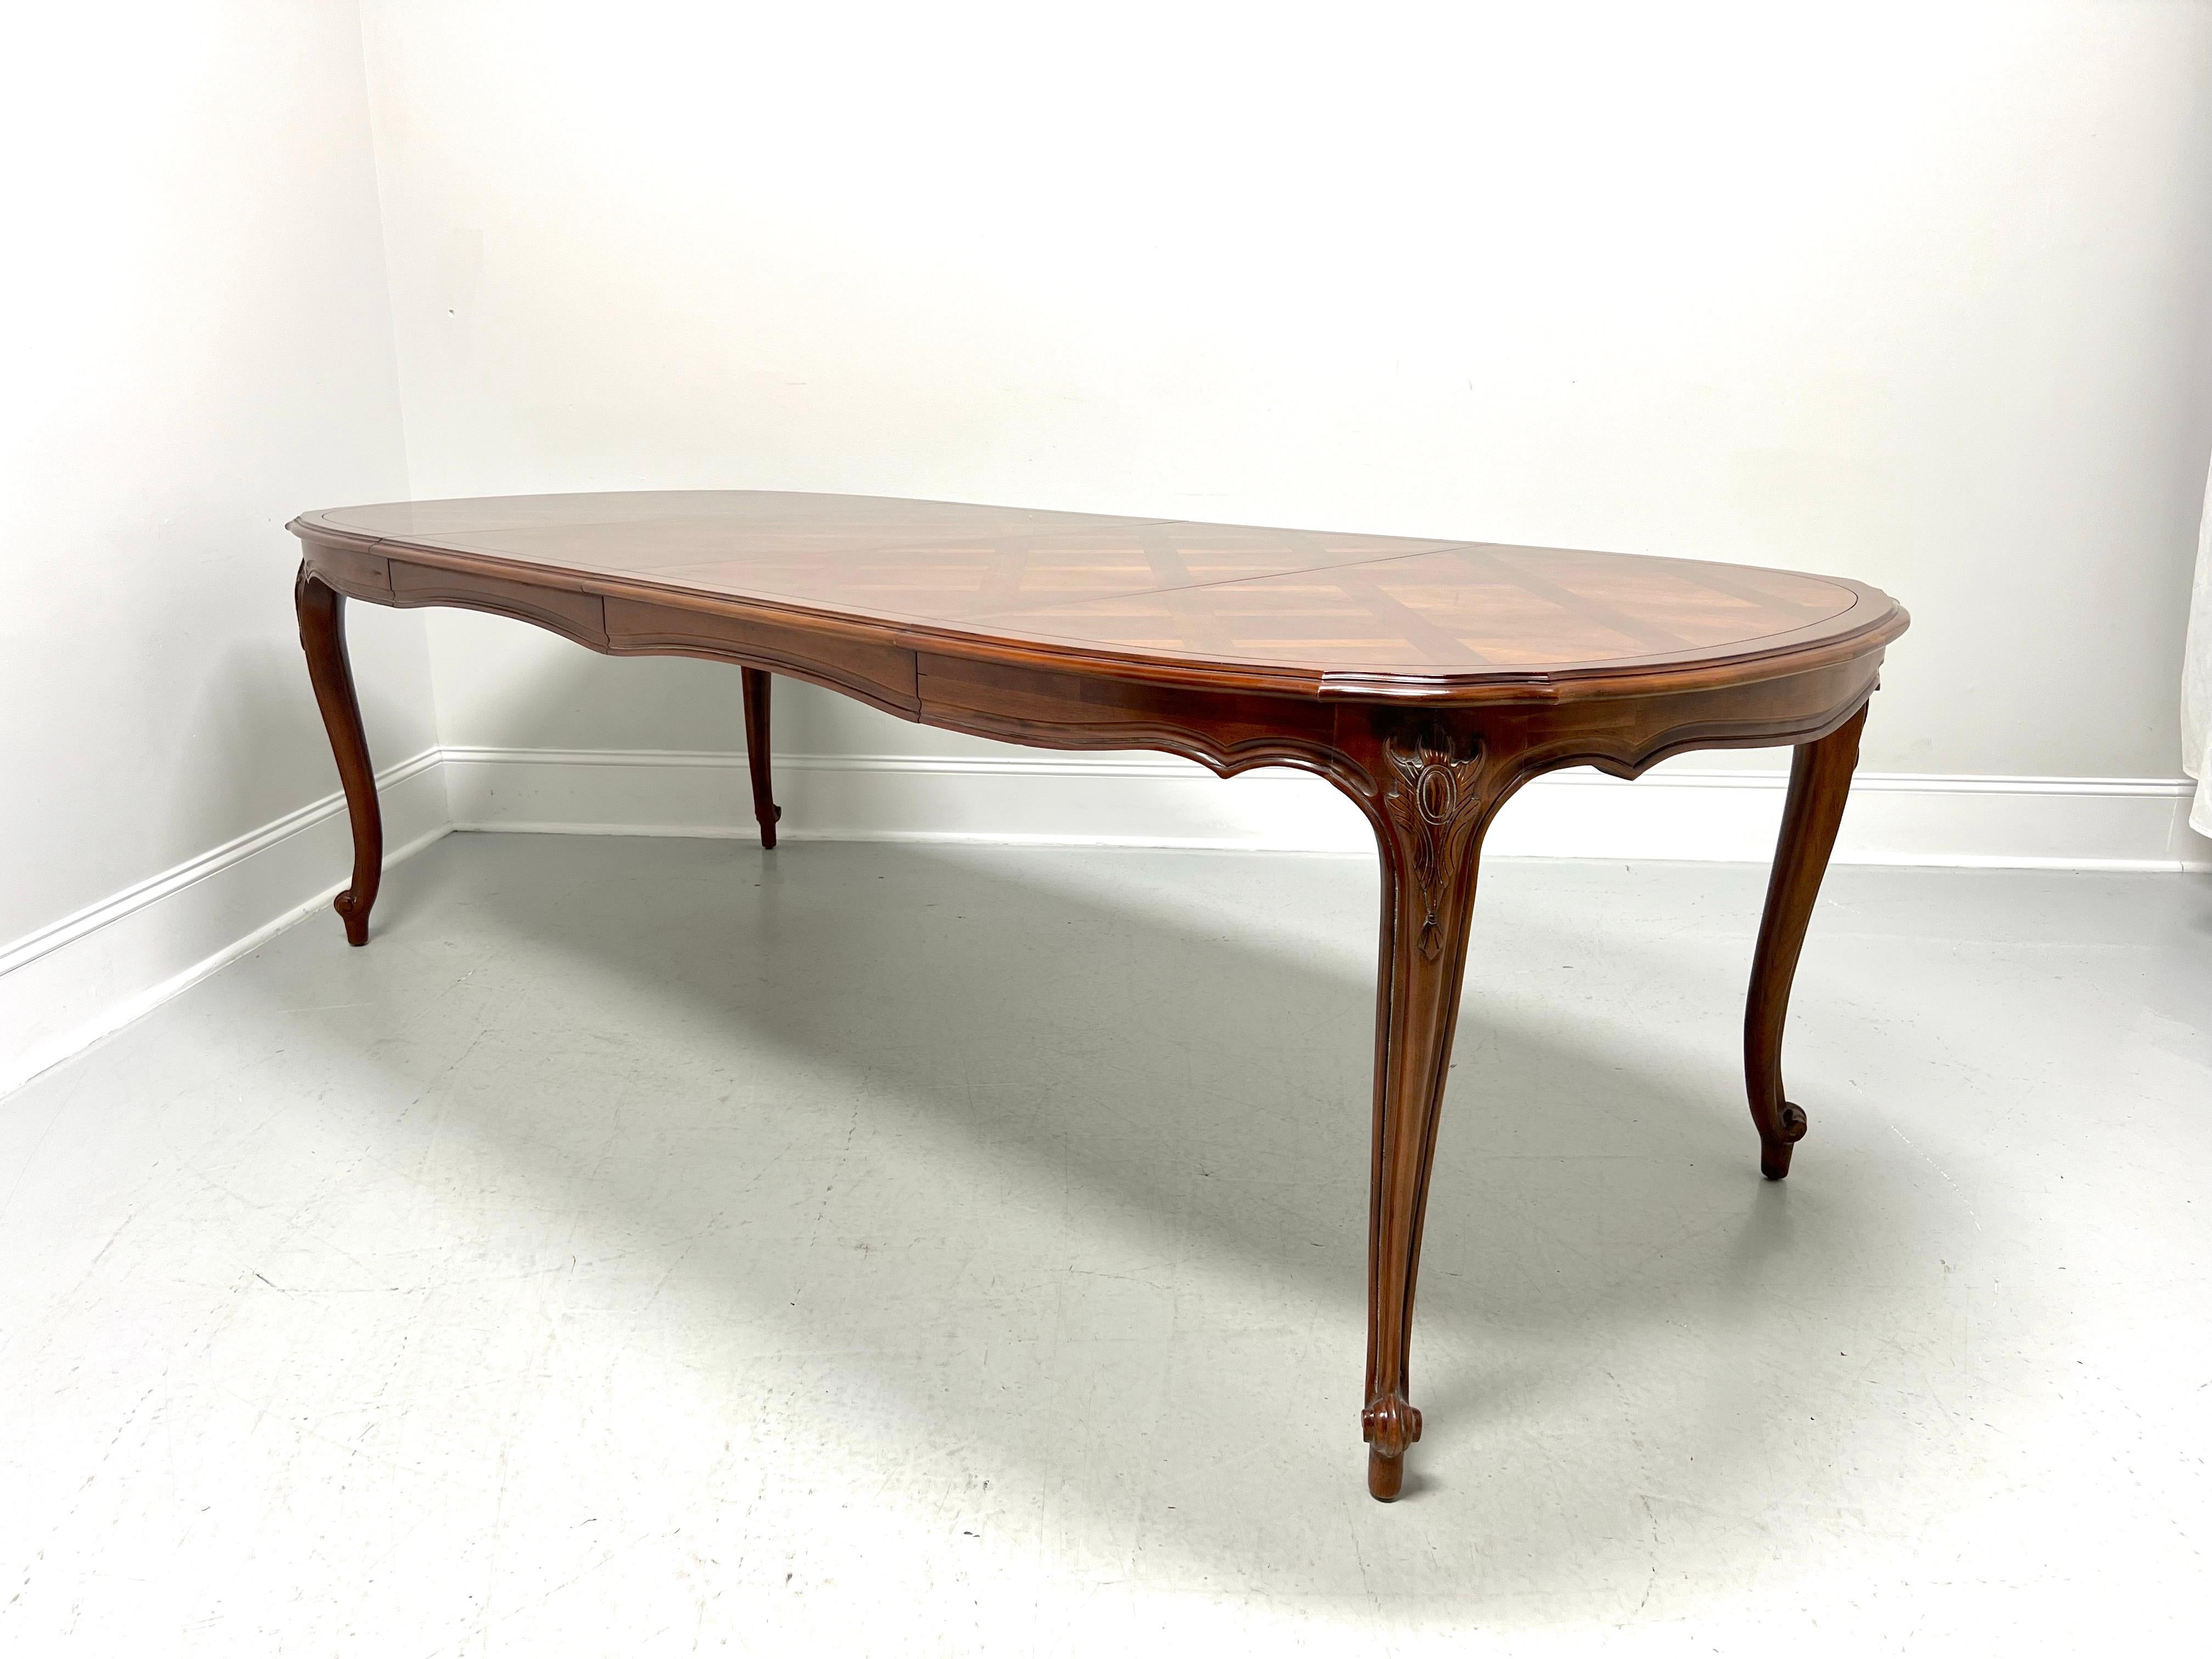 A French Provincial style oval dining table by Century Furniture, from their Chardeau Collection designed by Raymond K Sobota. Cherry wood with veneers, banded diamond-shaped parquetry top with a beveled serpentine edge, carved apron, decoratively